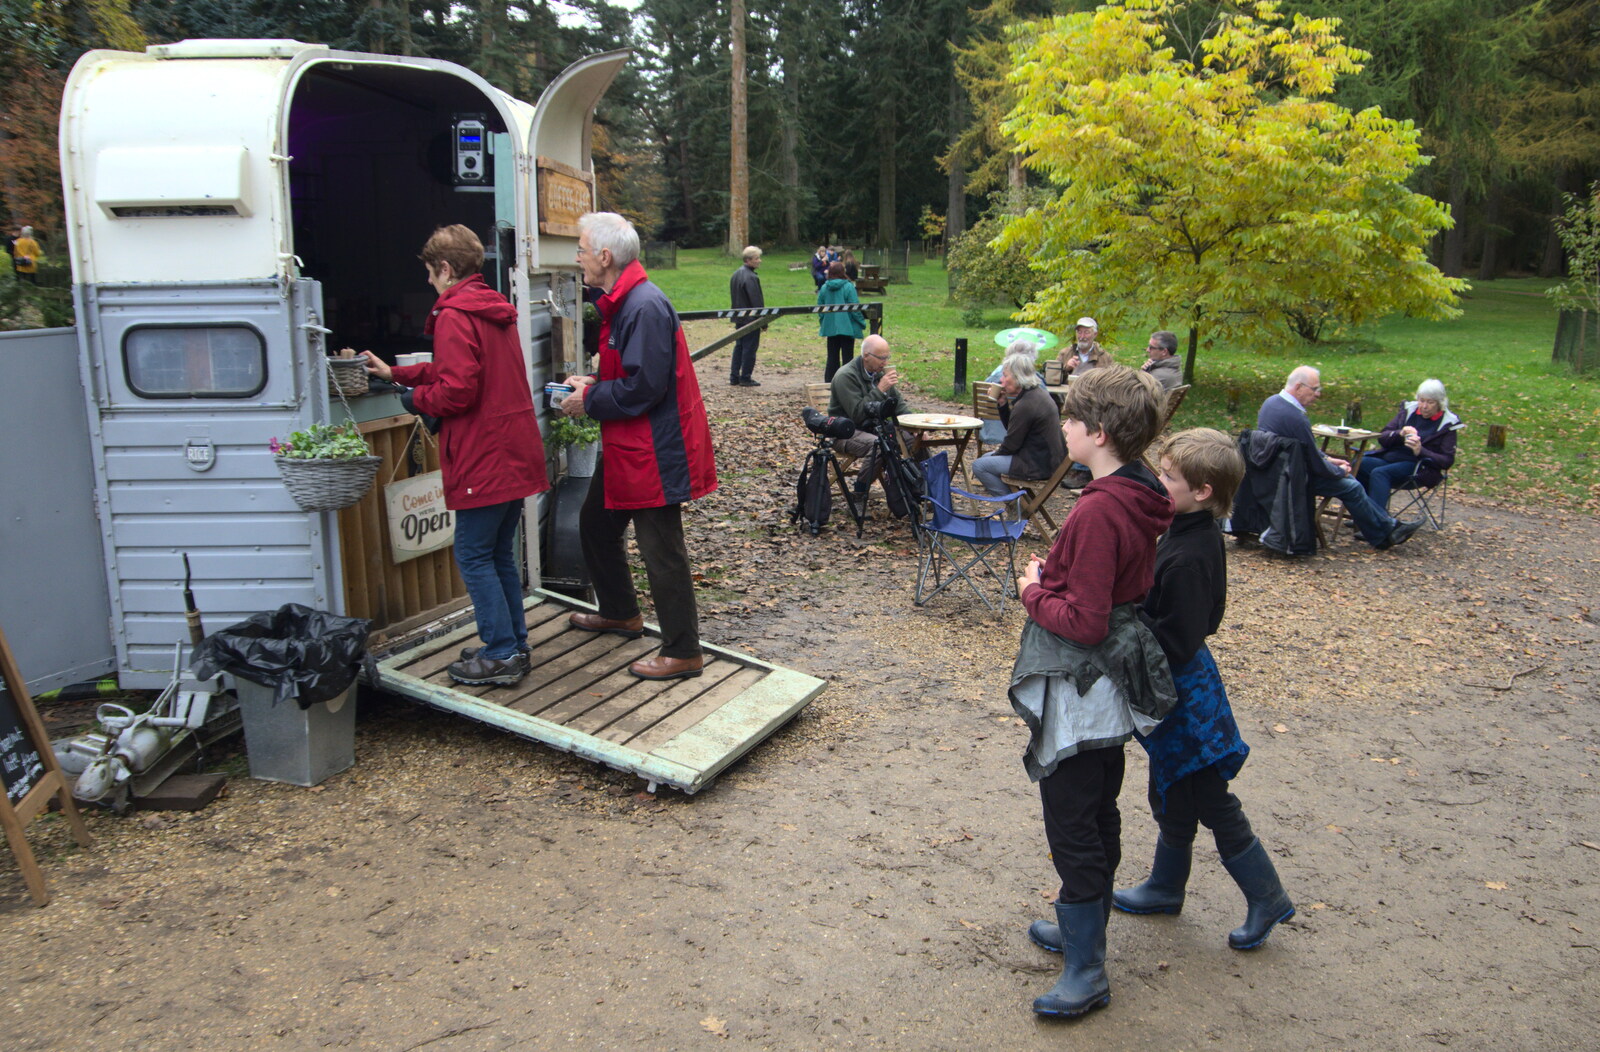 The boys queue to get ice-cream from a van from A Trip to Lynford Arboretum, Mundford, Norfolk - 30th October 2020